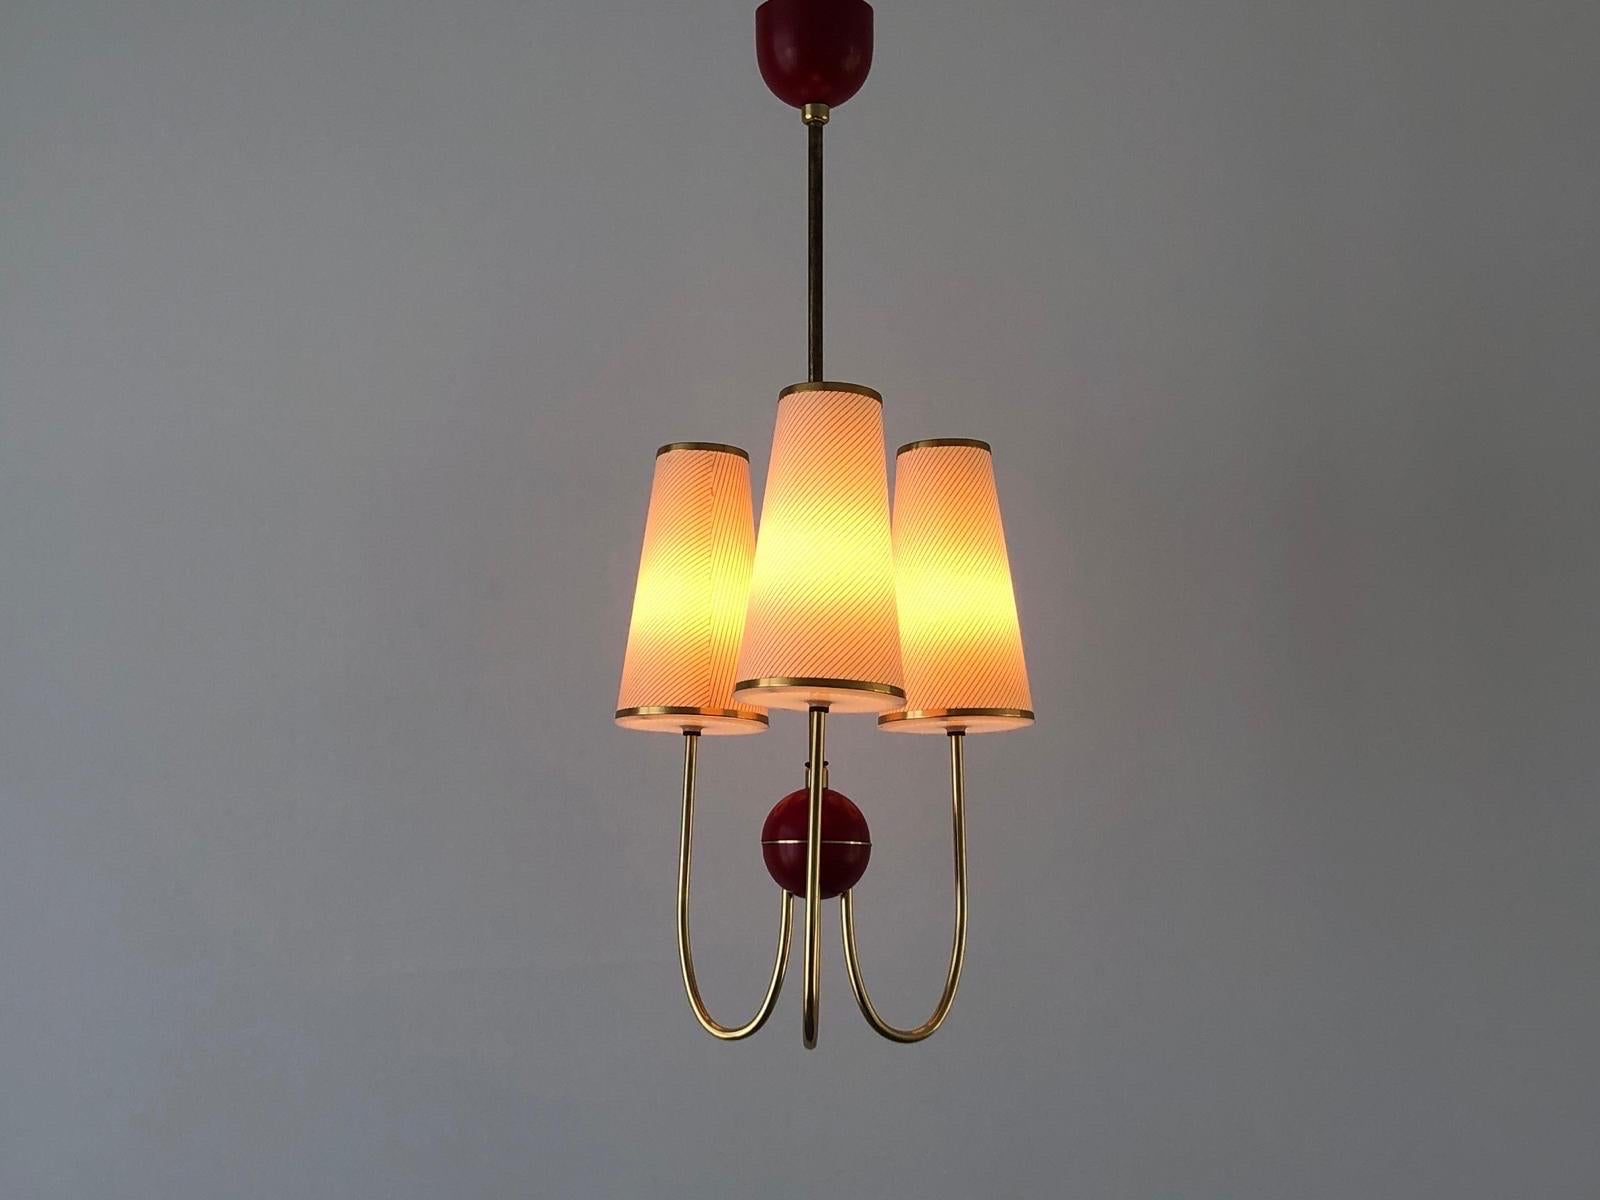 3-armed Fabric and Plastic Sputnik Pendant Lamp by Erco, 1950s, Germany For Sale 1